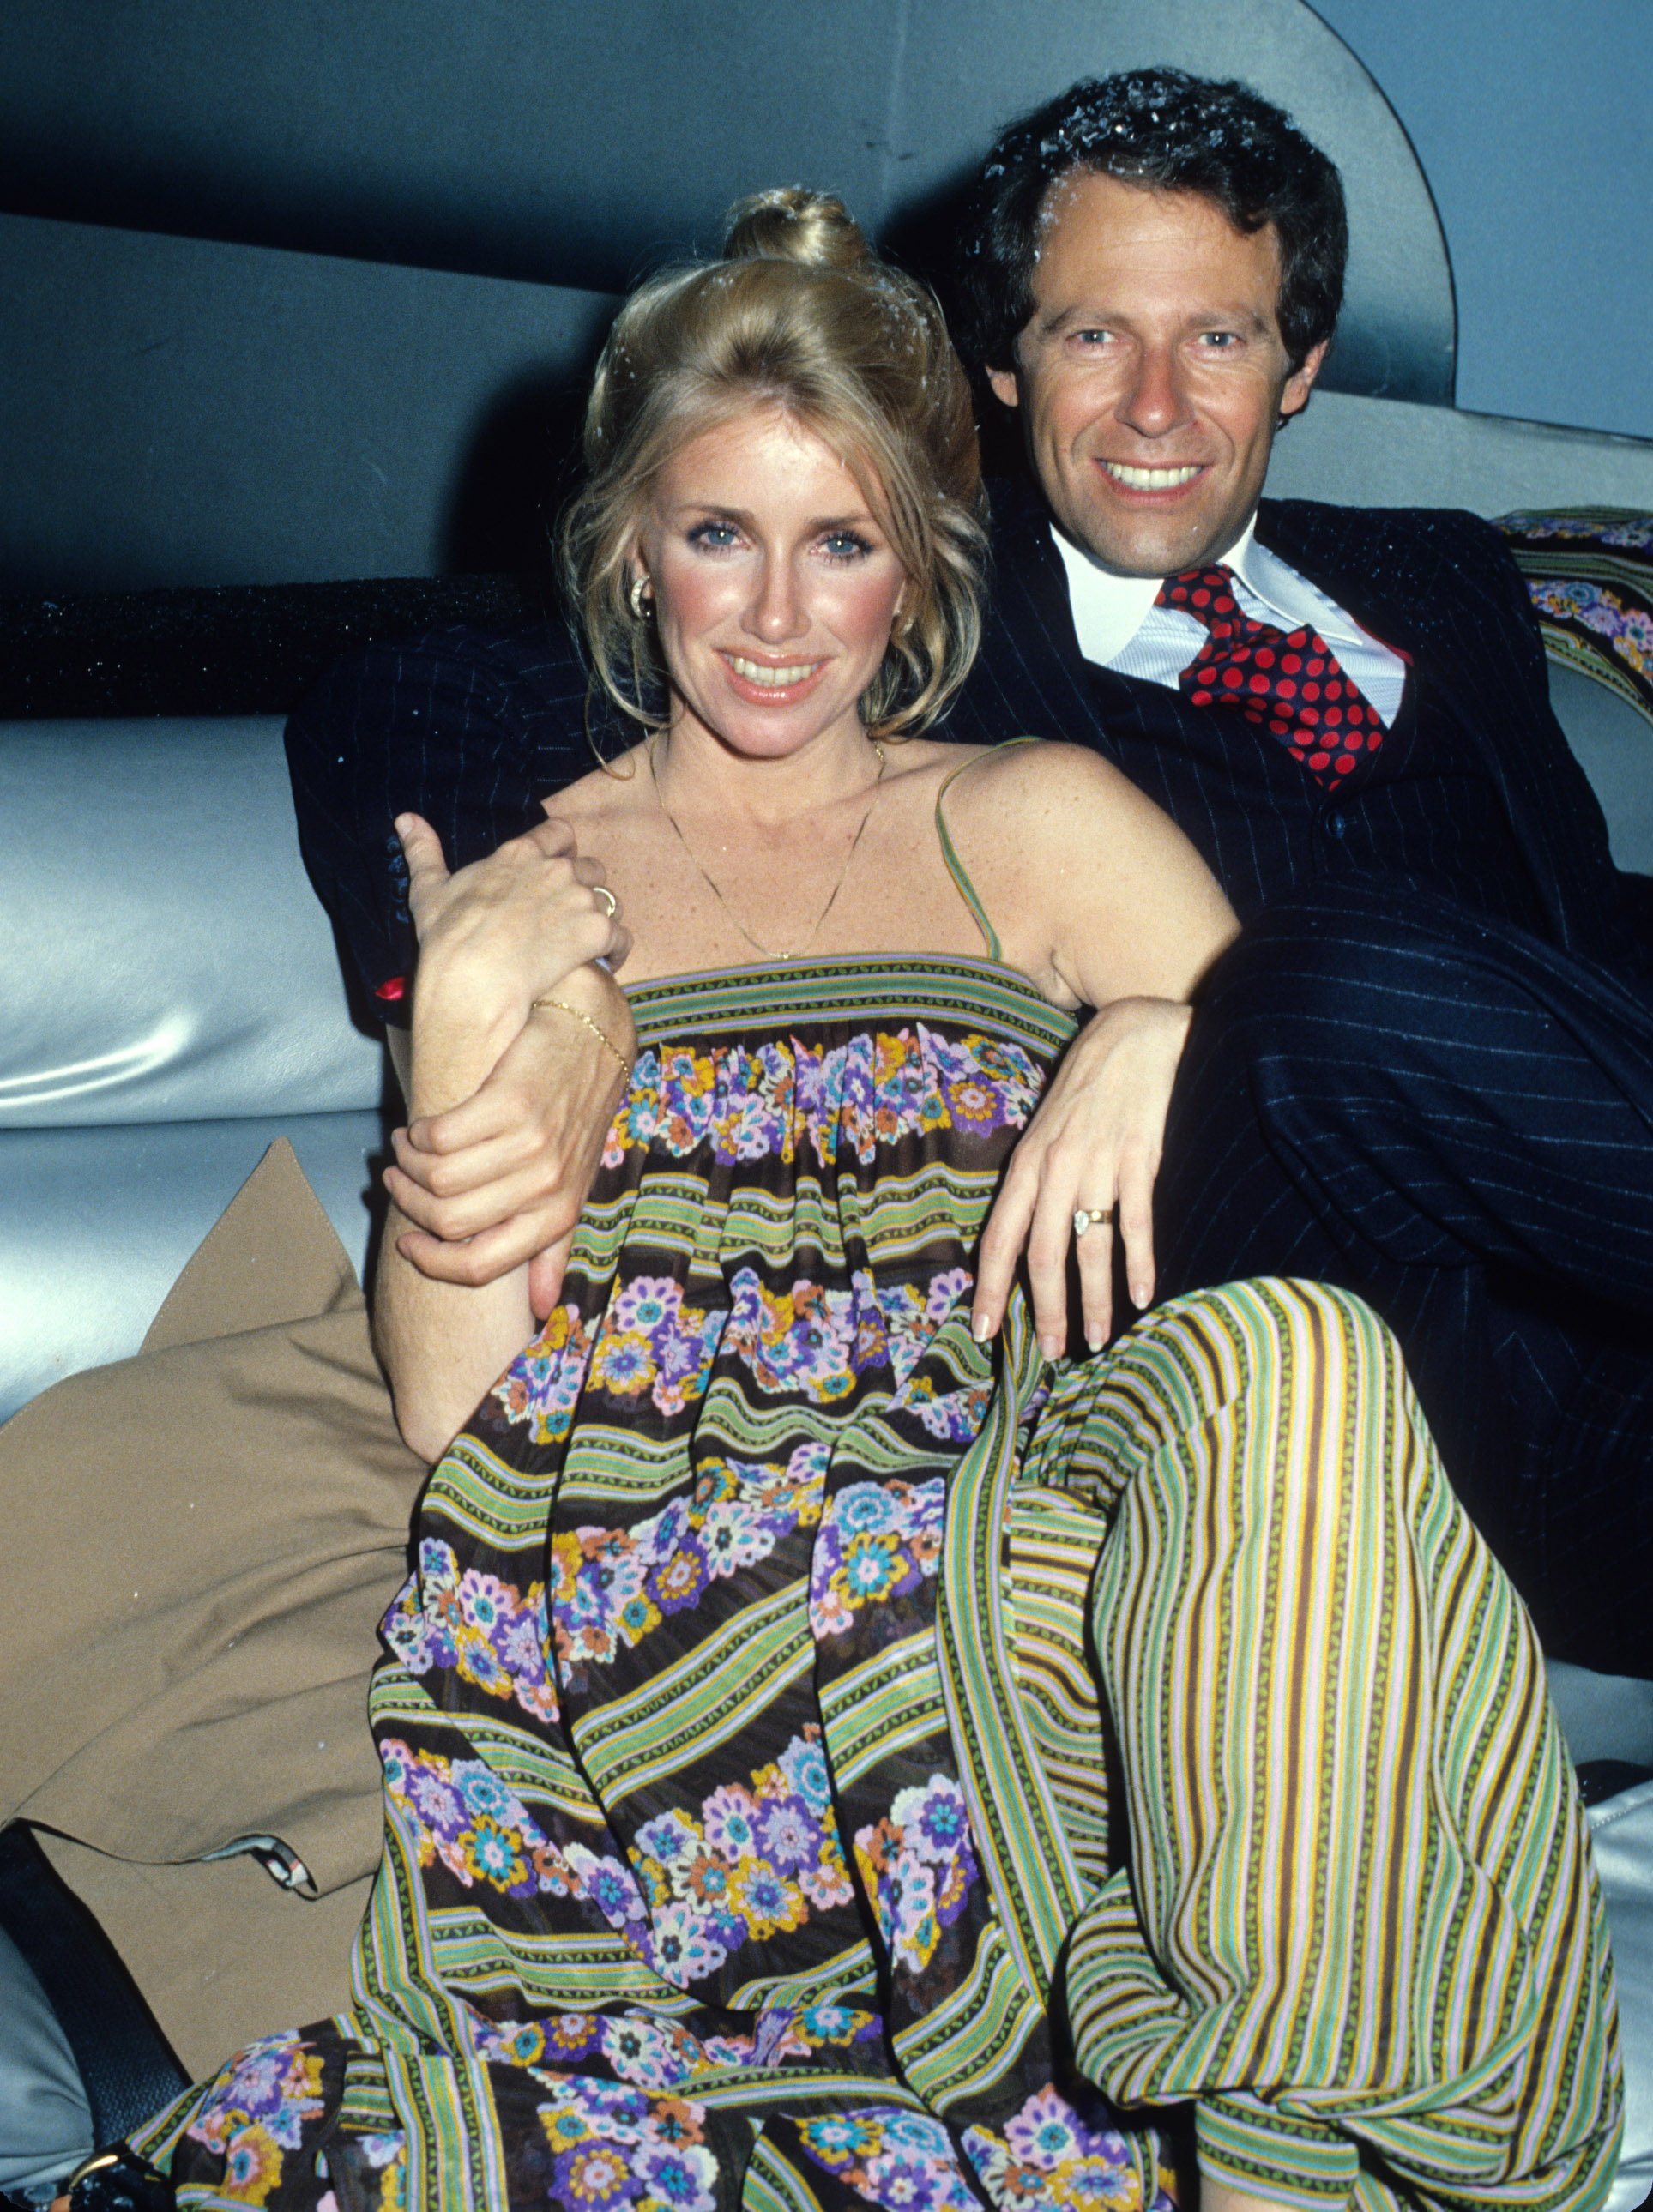 Suzanne Somers and her husband Alan Hamel at Studio 54 in New York on December 19, 1978 | Source: Getty Images